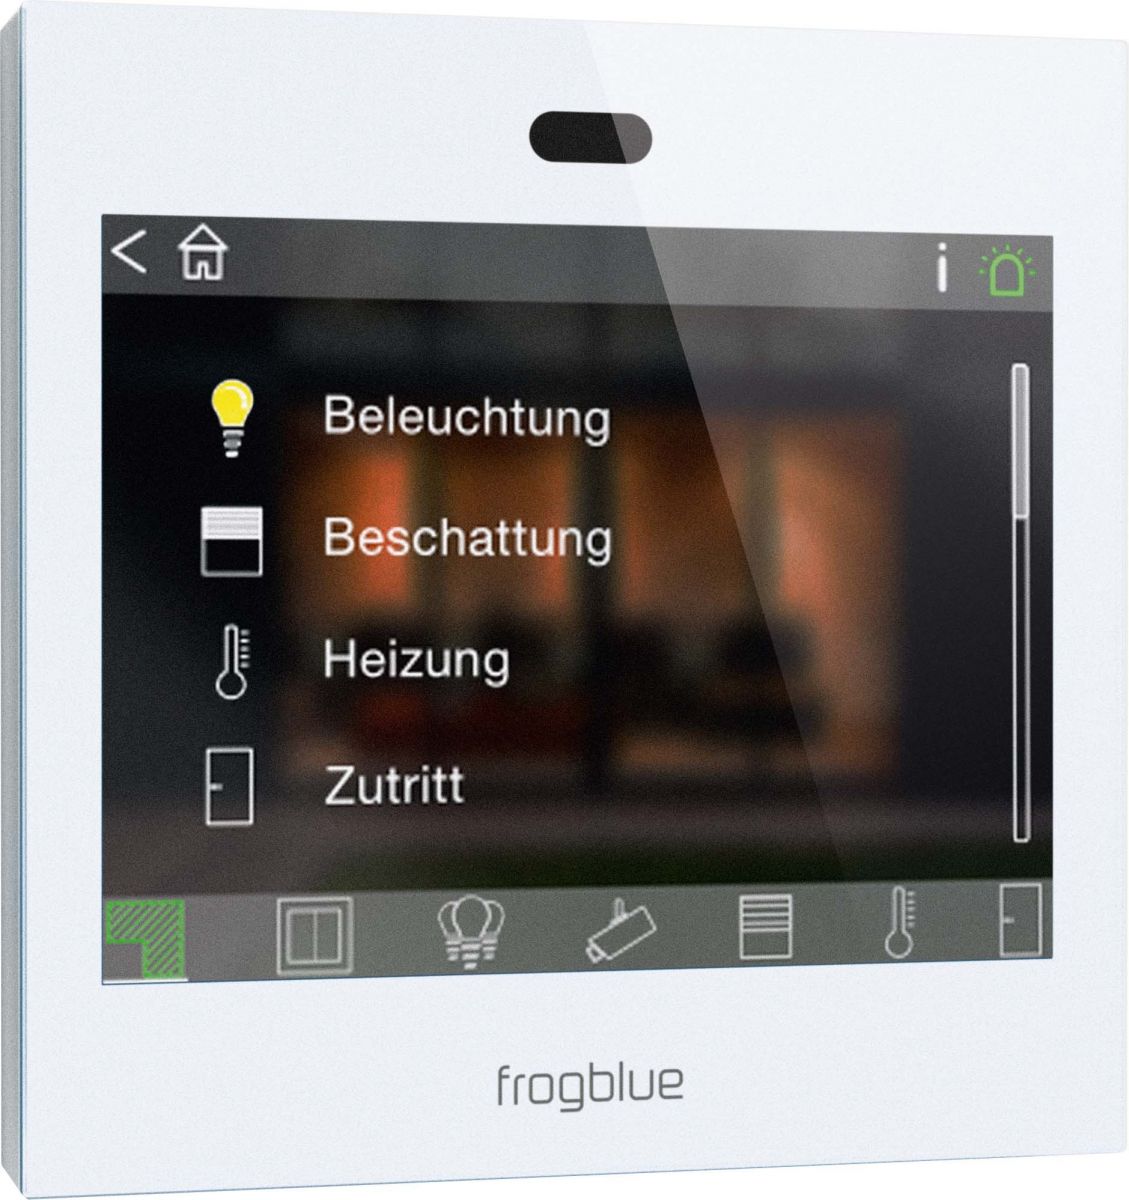 Touchscreen Bed.interface frogDisplay